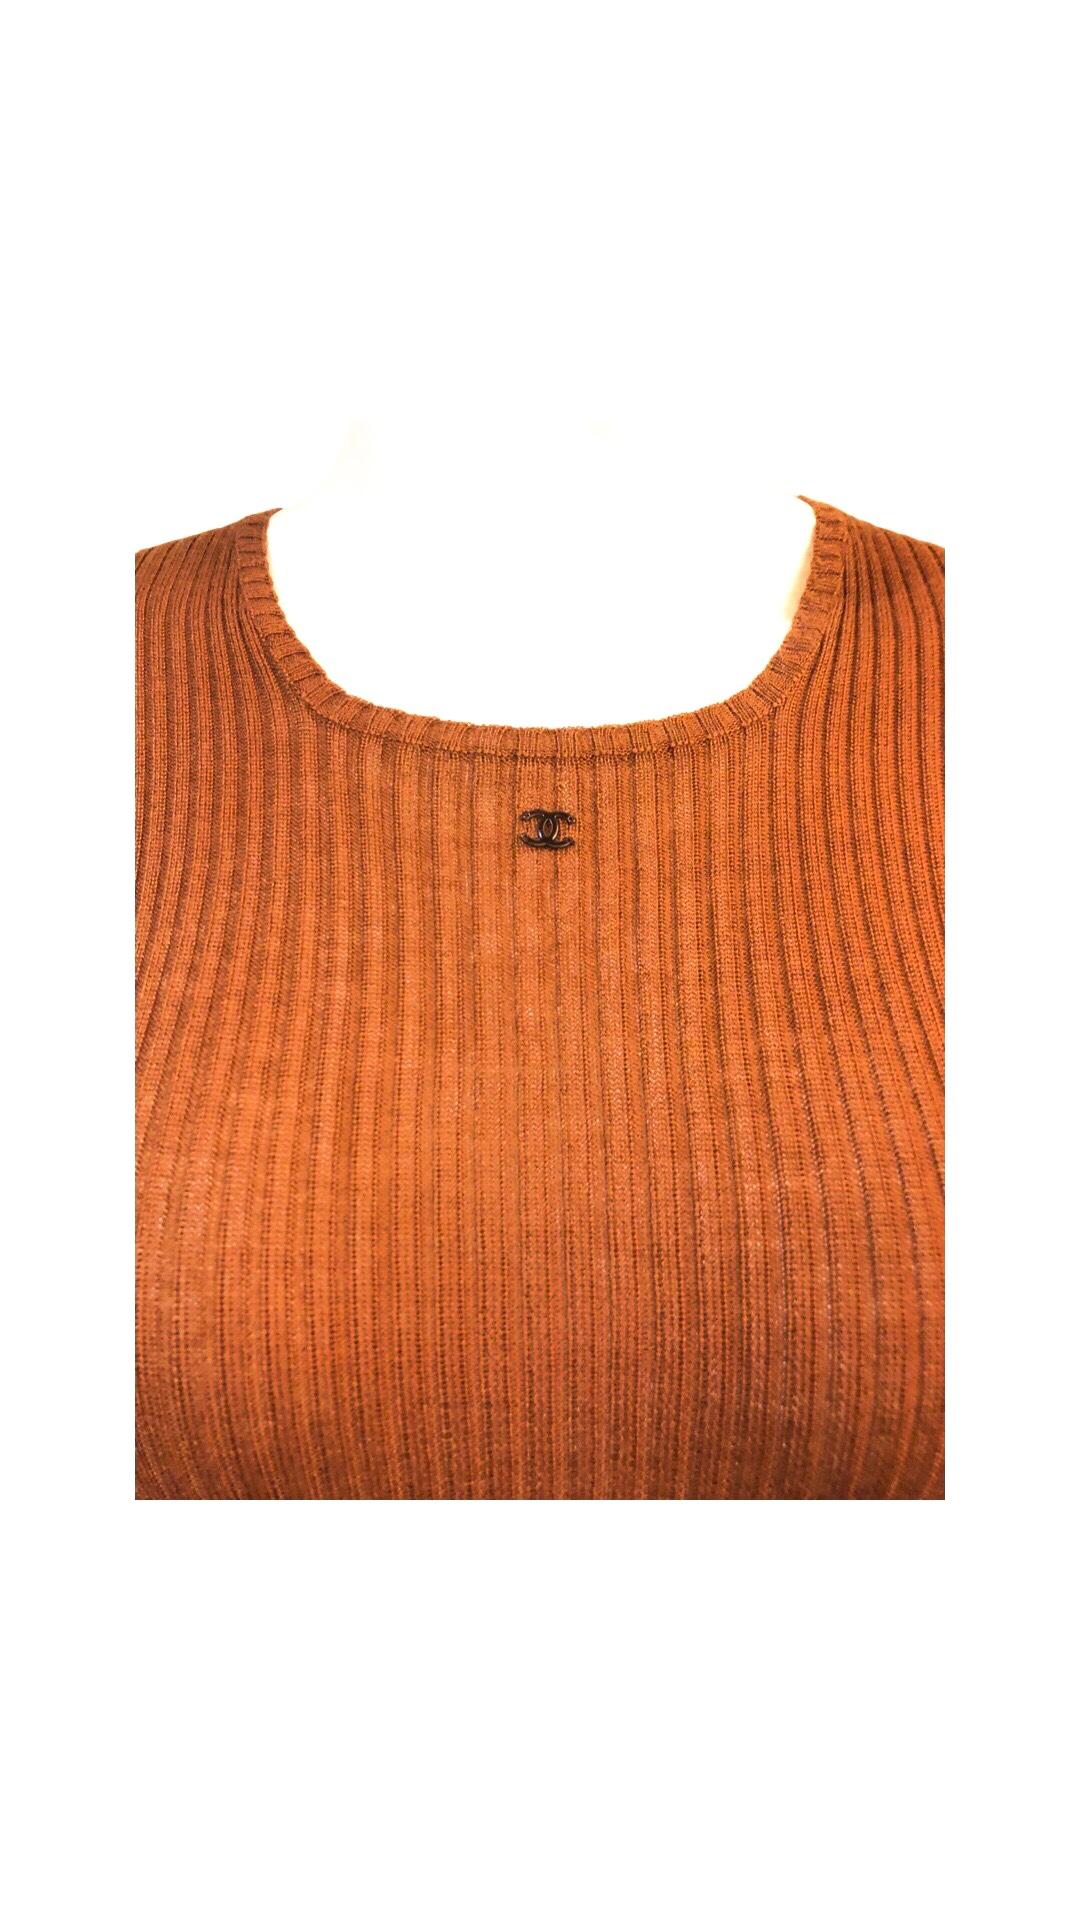 - Unworn Chanel brown cashmere and silk short sleeves top from A/W 1998 collection.

- CC metal logo.

- Size 40. 
